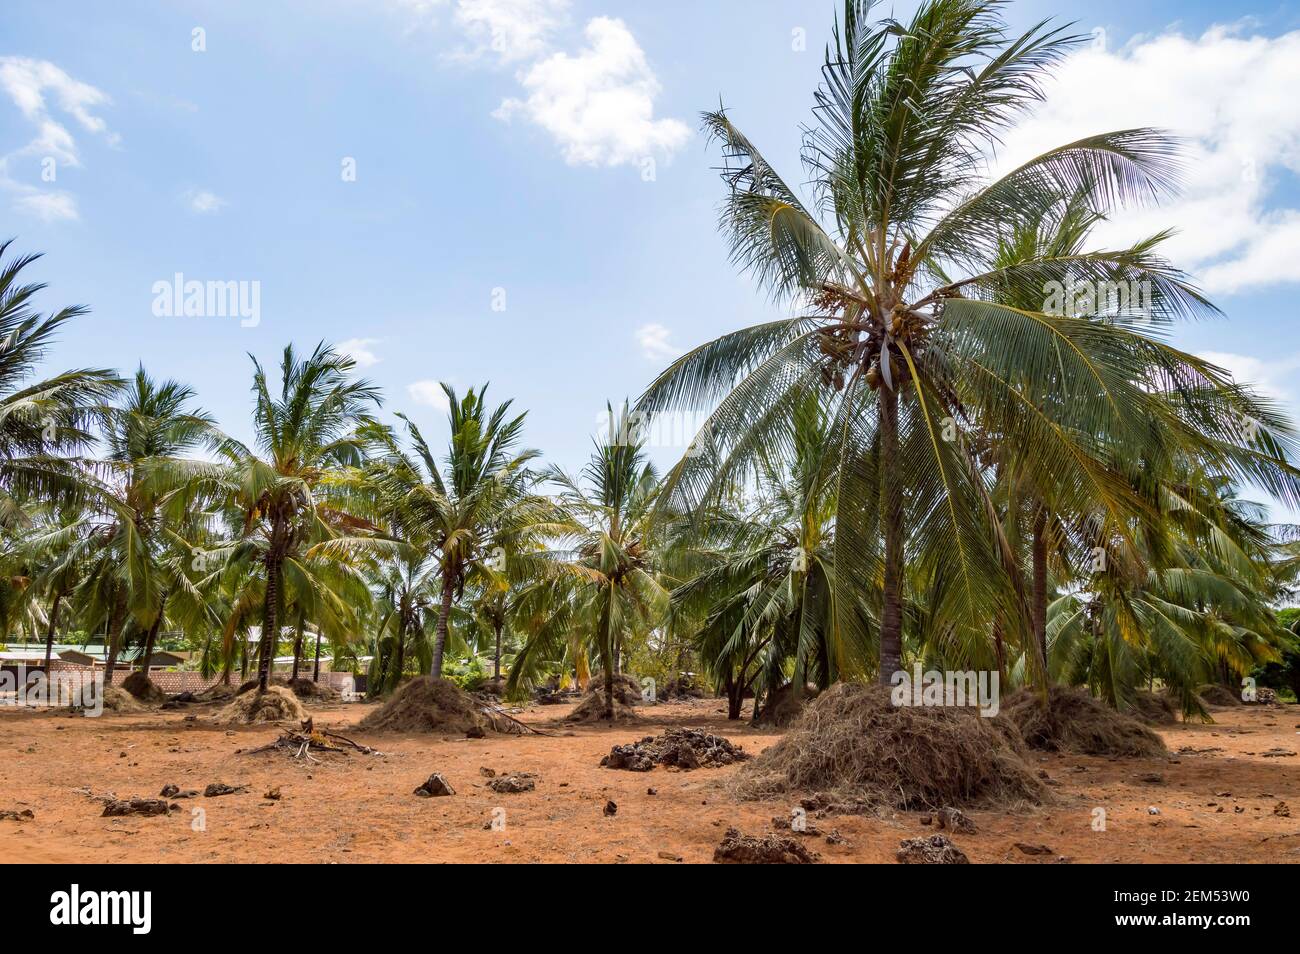 A large plantation of coconut palms and huts on the shores of the Indian Ocean, Watamu. Kenya Stock Photo